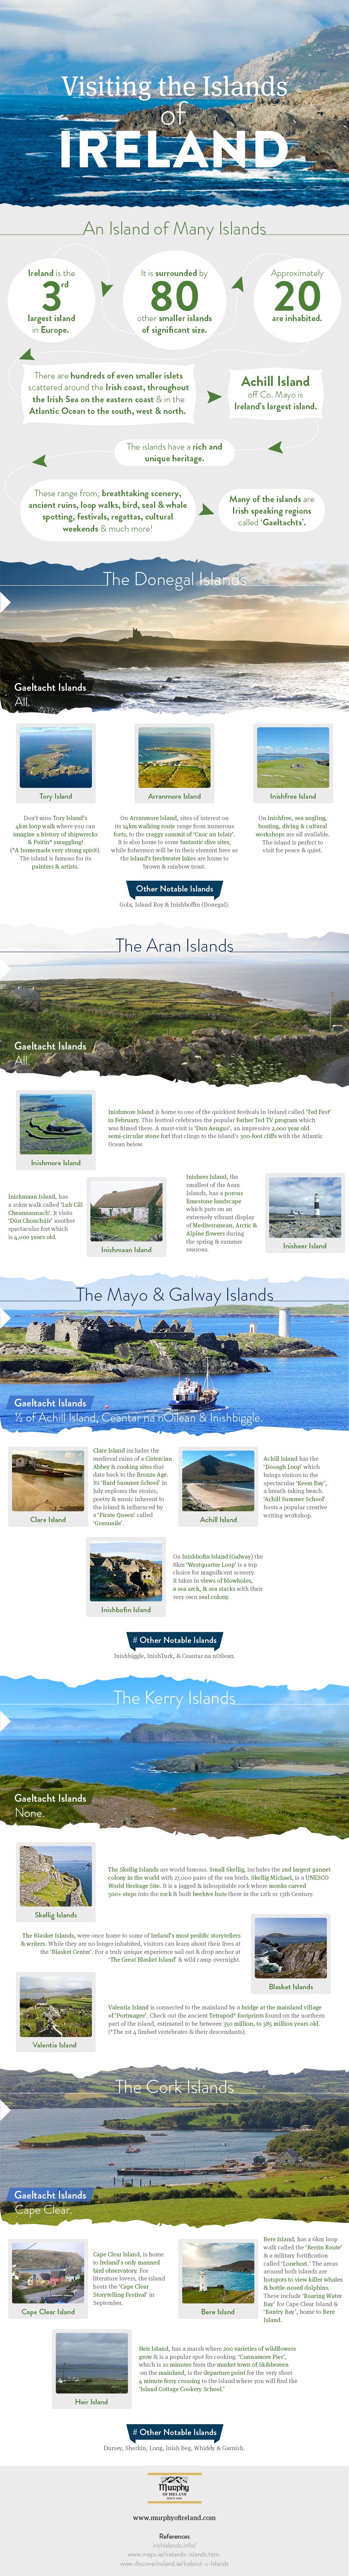 What to do When Visiting the Islands of Ireland 